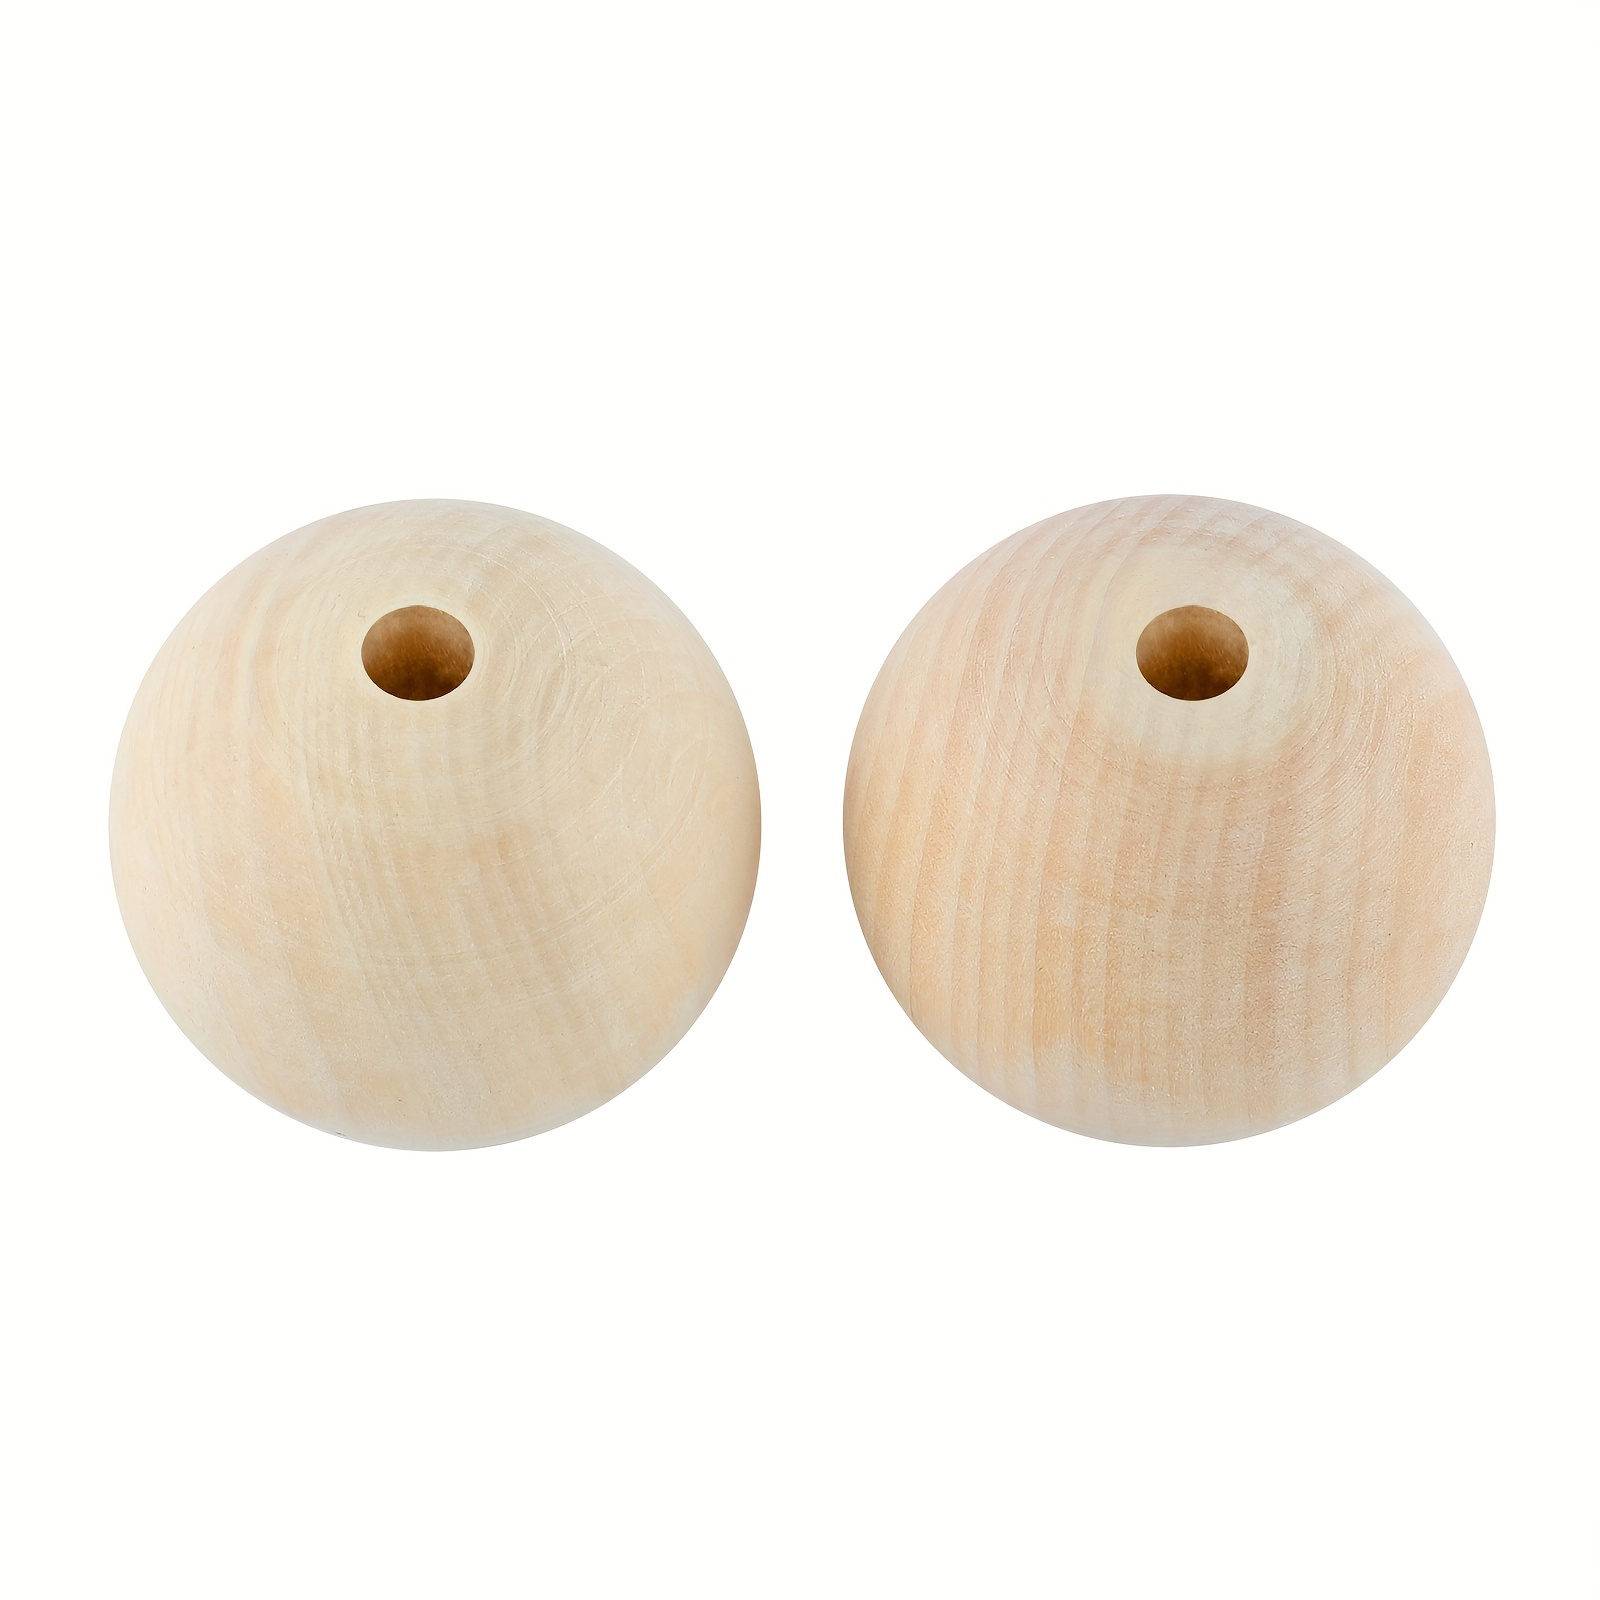 20MM ROUND NATURAL Wood Beads Wooden Craft Beads Home Party